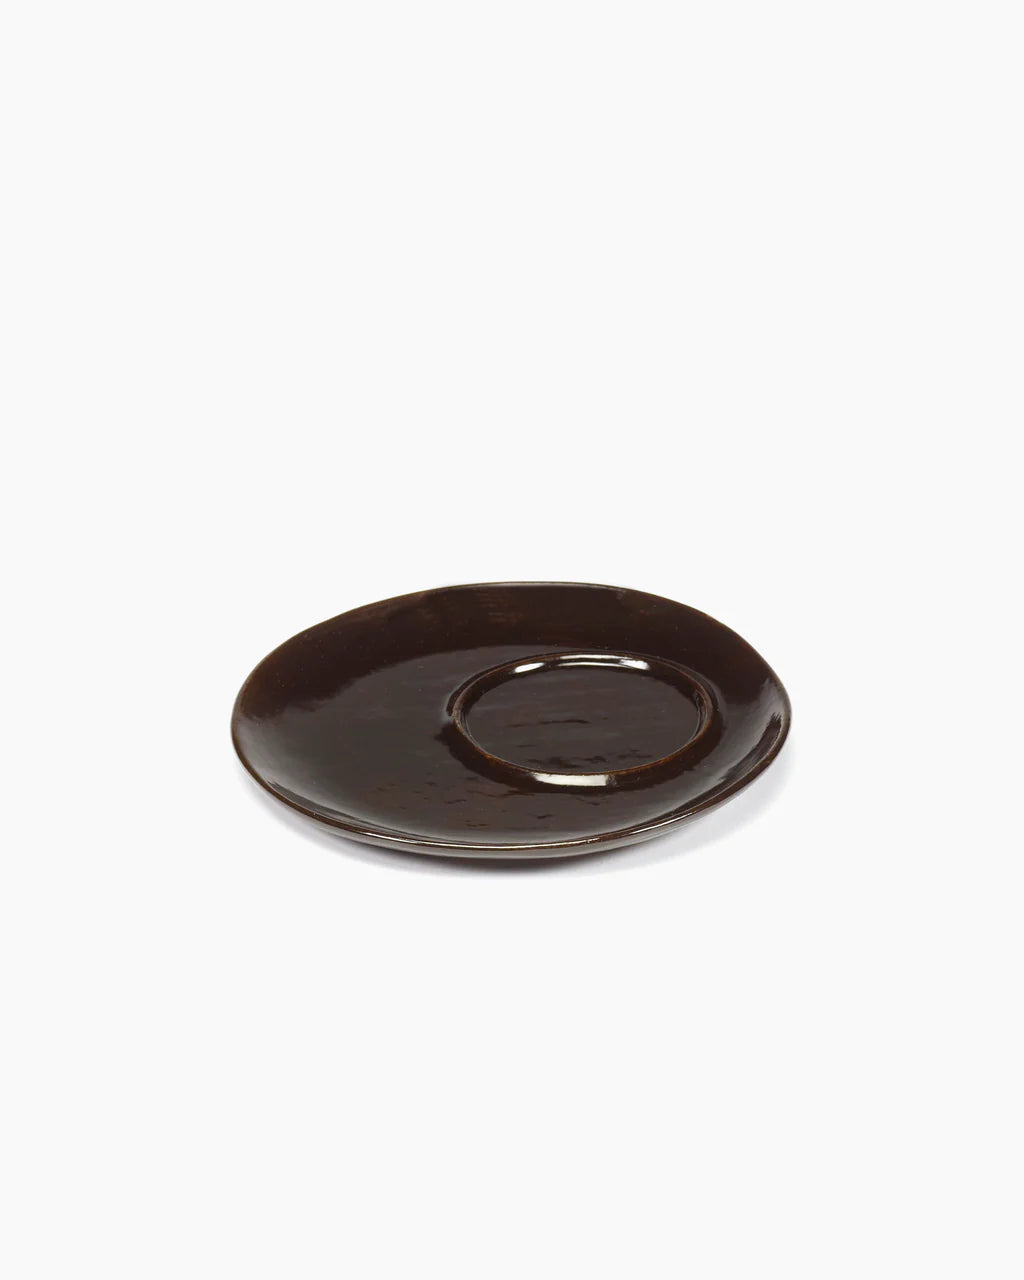 Ebony Saucer for Coffee Cup